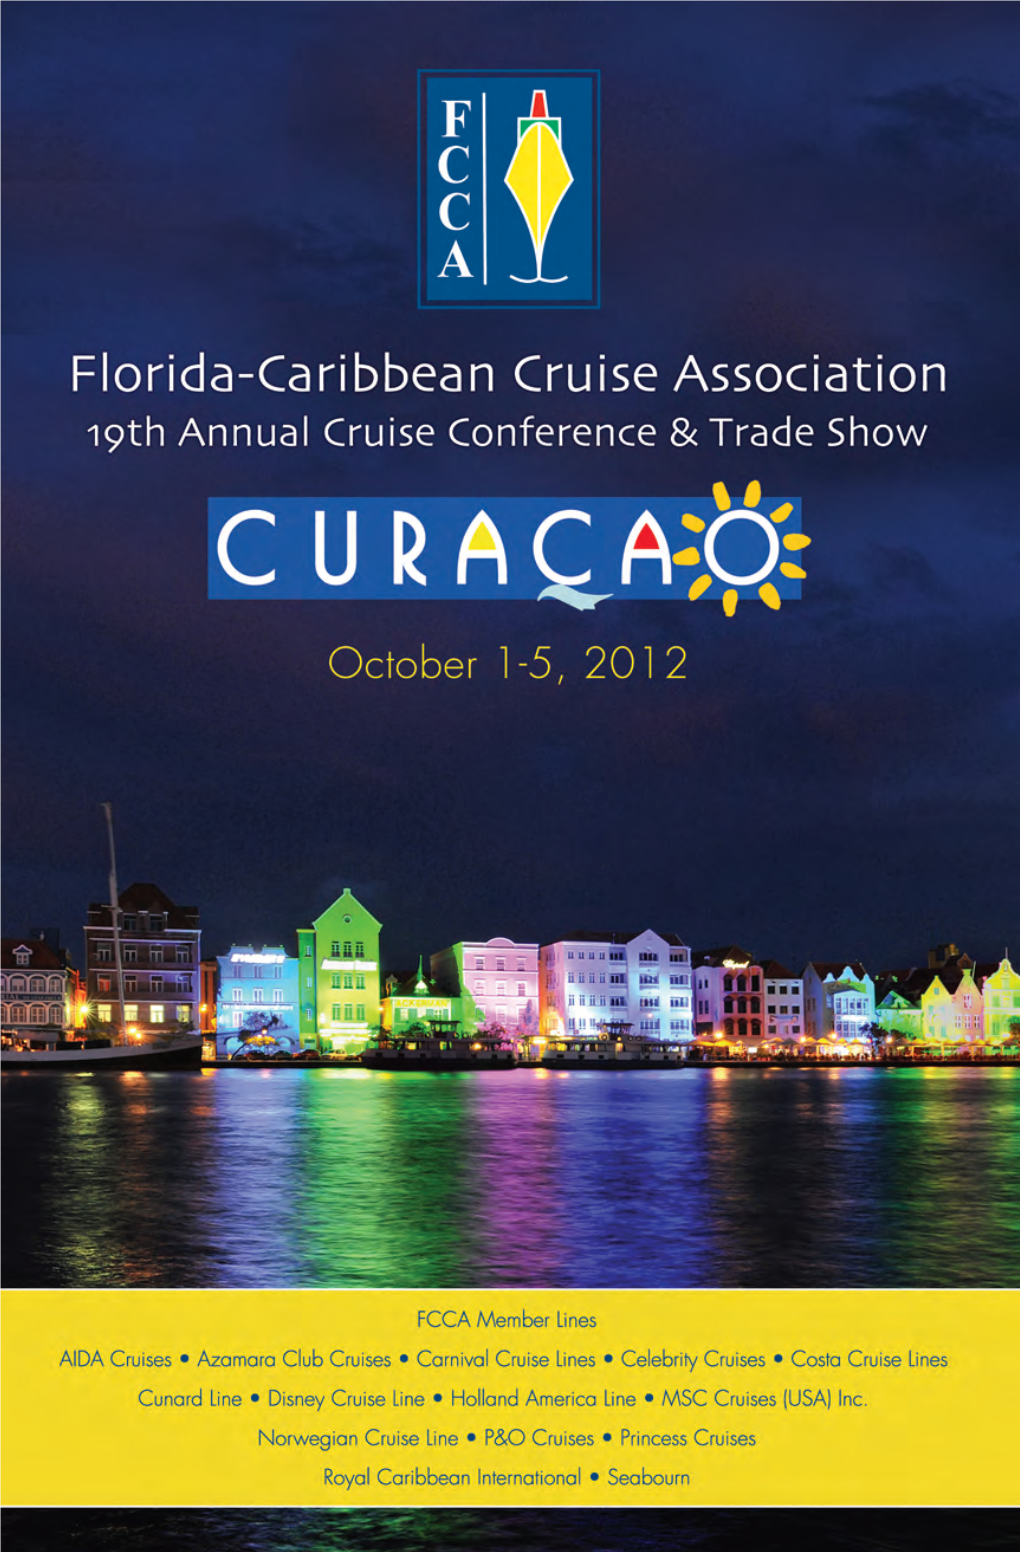 Conference & Trade Show, Taking Place in Curaçao, October 1-5, 2012